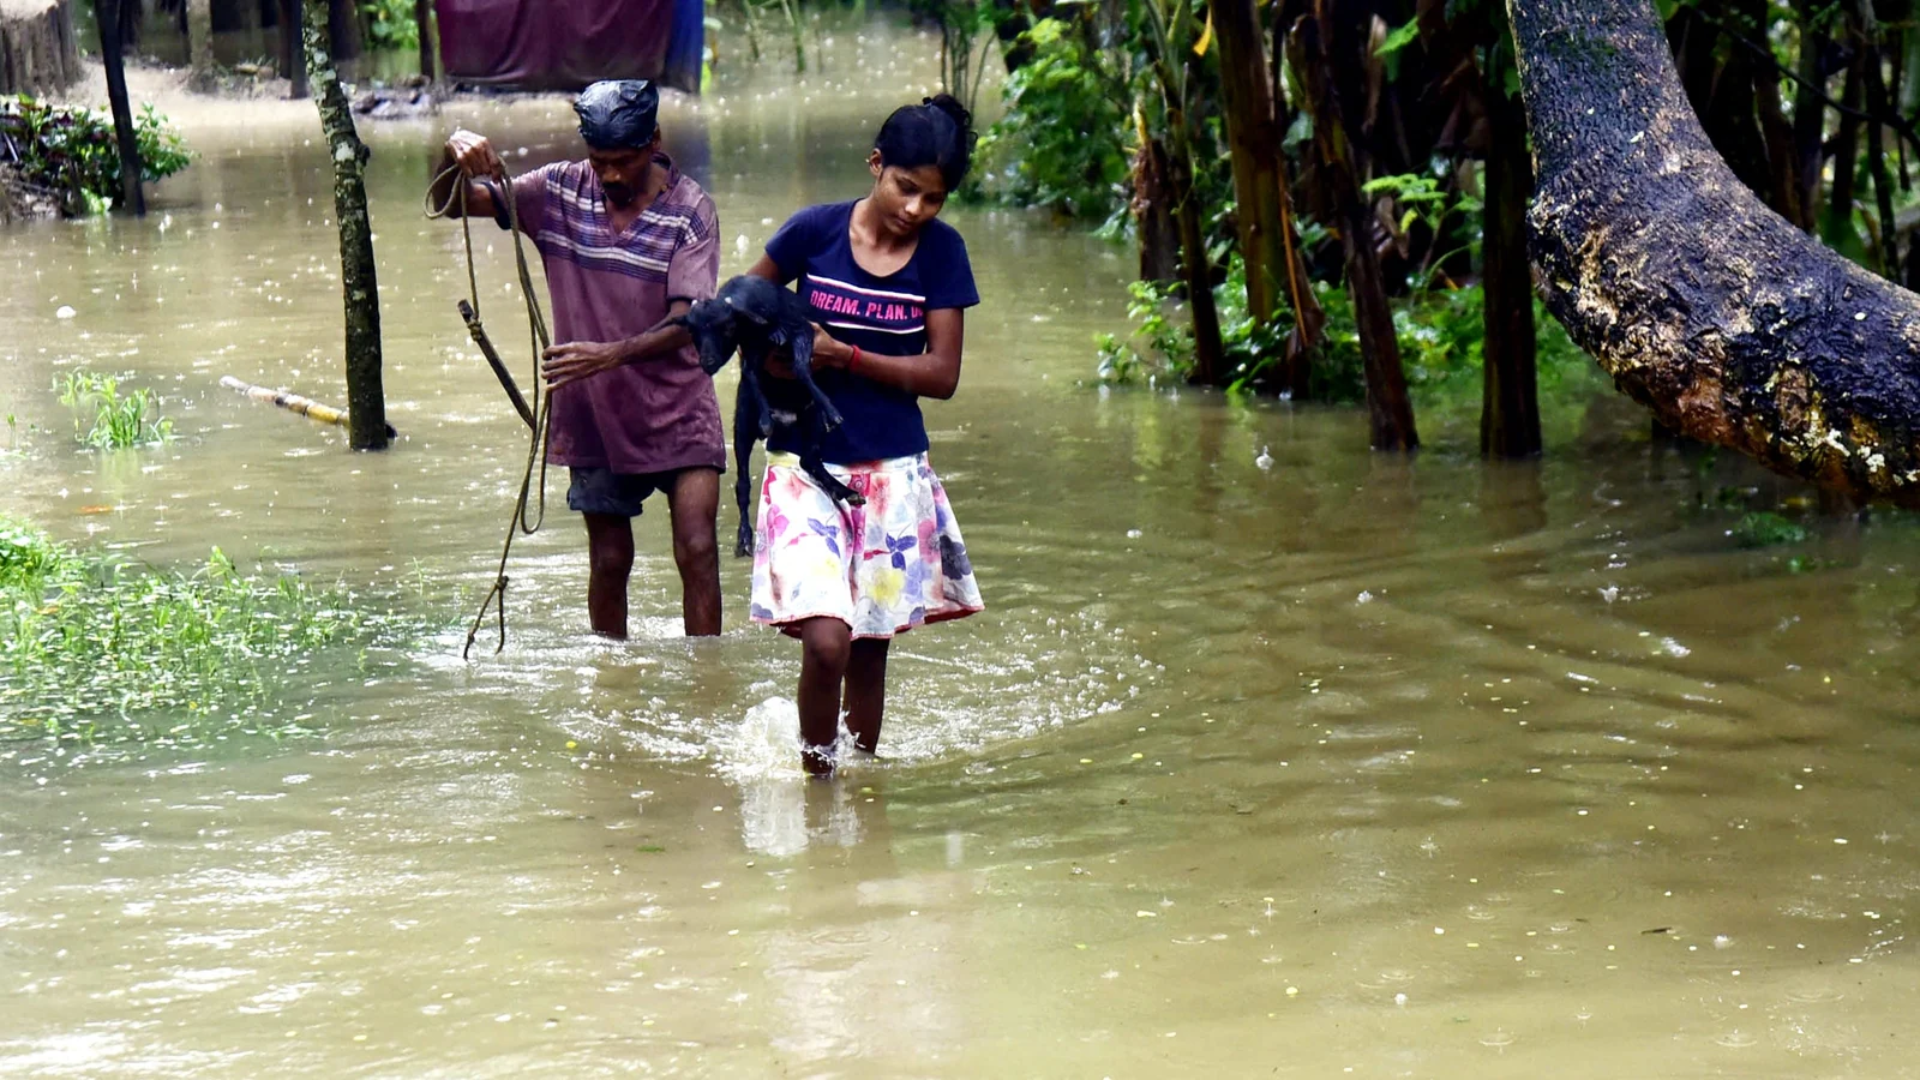 Flood Situation In Assam Grows Critical, CM Himanta Biswa Sarma Says Rescue Teams On Standby